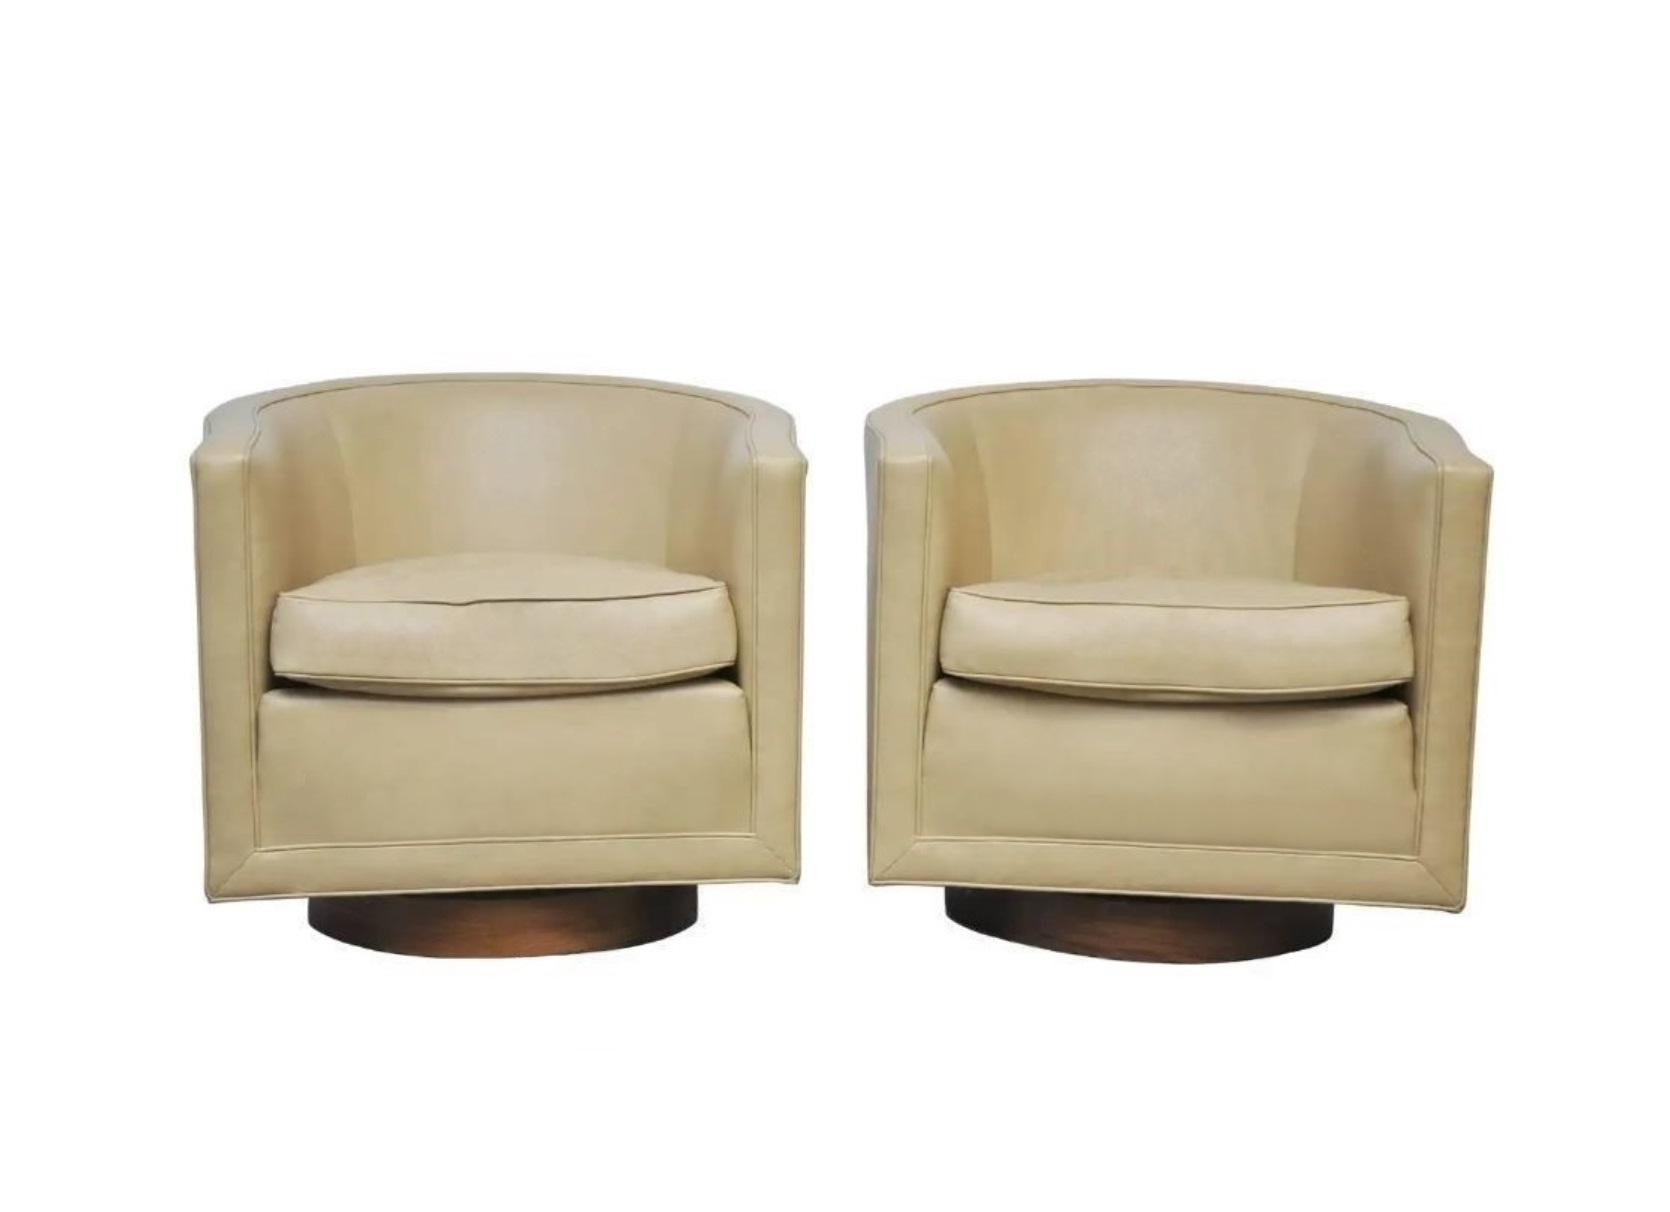 Add some playful elegance to your space with these swiveling Dunbar chairs designed by Edward Wormley, circa 1960's. His signature style, defined by clean lines and architectural simplicity, thoughtfully curated with great emphasis on comfort